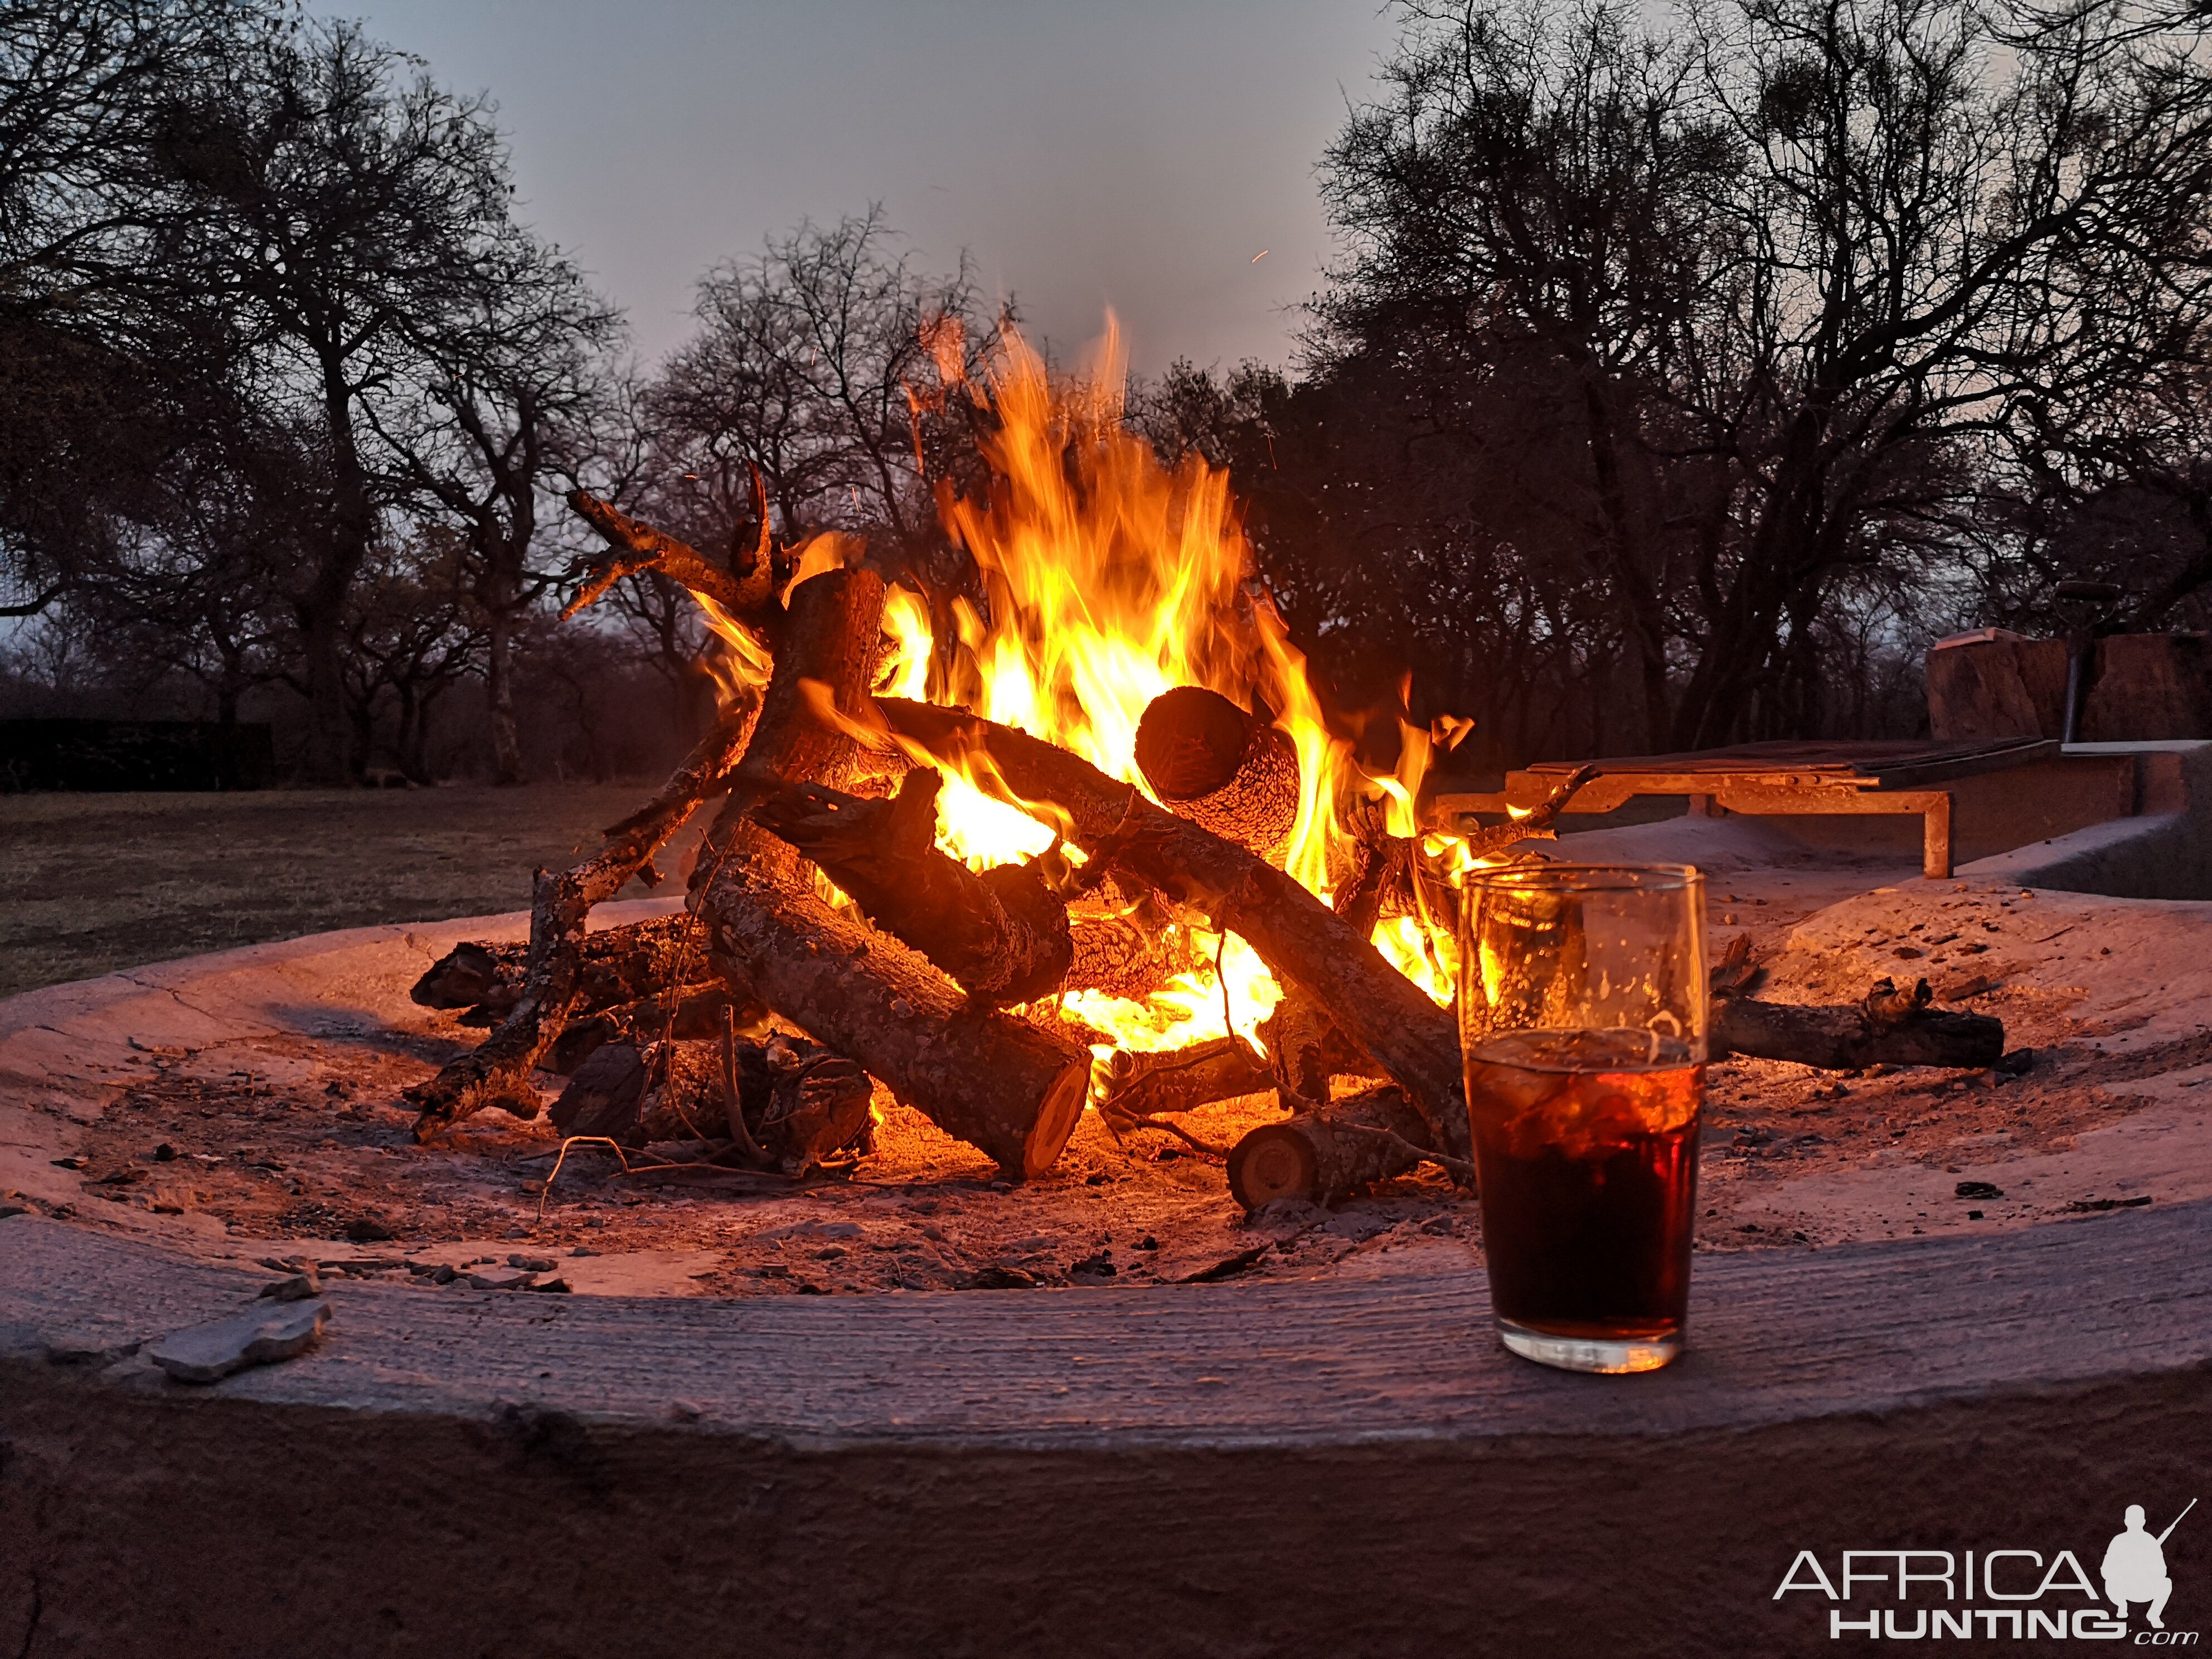 Smooth drinks around big fires shared with great people